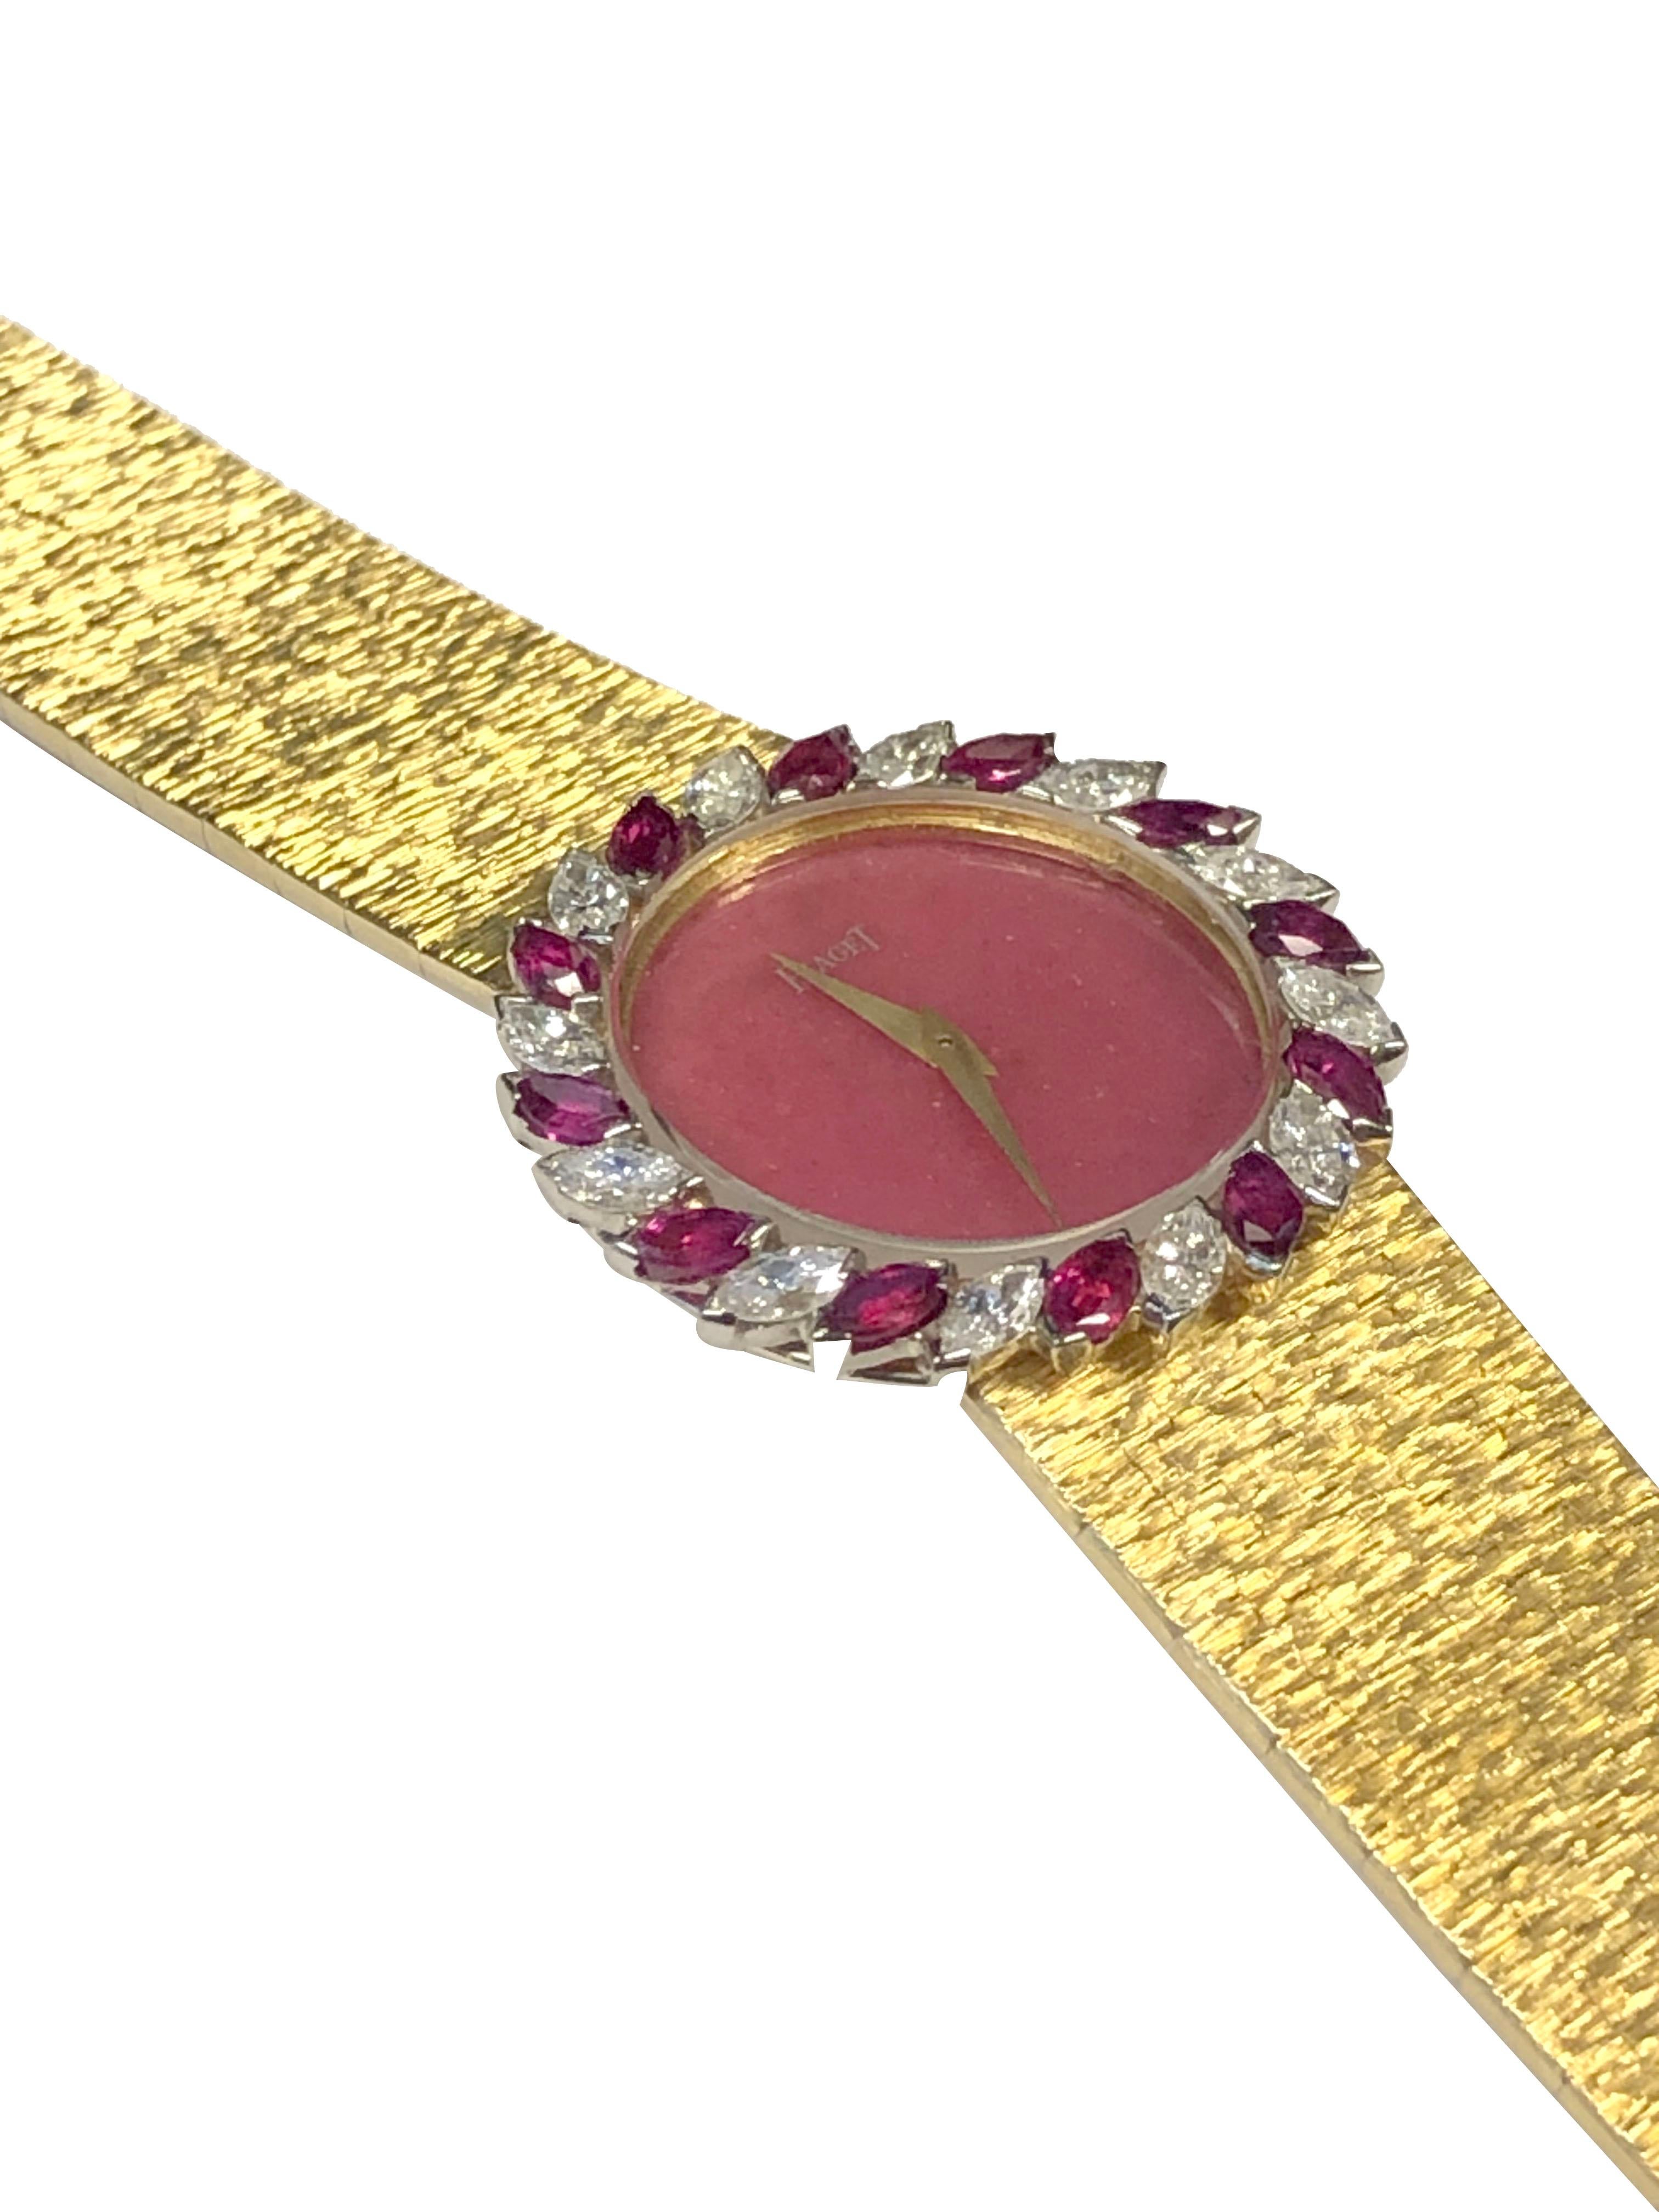 Circa 1980 Piaget Ladies Wrist Watch, 28 M.M 18k Yellow Gold 2 piece case with Marquis shape Diamond and Ruby Bezel, Diamond total approximately 1.25 carat. 17 Jewel Mechanical, Manual wind movement, Rubelite Stone Dial. 5/8 inch wide soft flexible